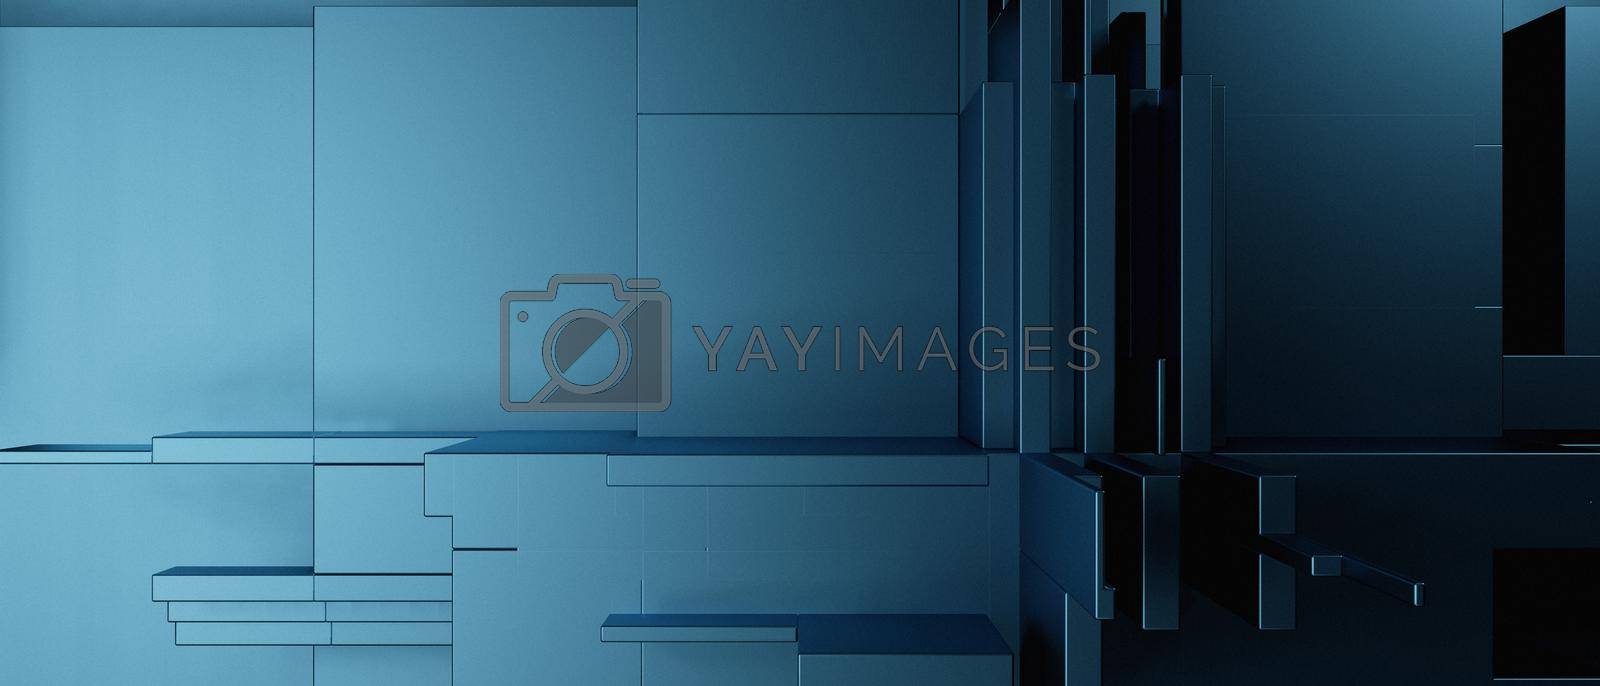 Royalty free image of Abstract Shiny Futuristic Geometric Tech Futuristic Cubes Future Blue Turquoise Iillustration Background Wallpaper 3D Render by yay_lmrb